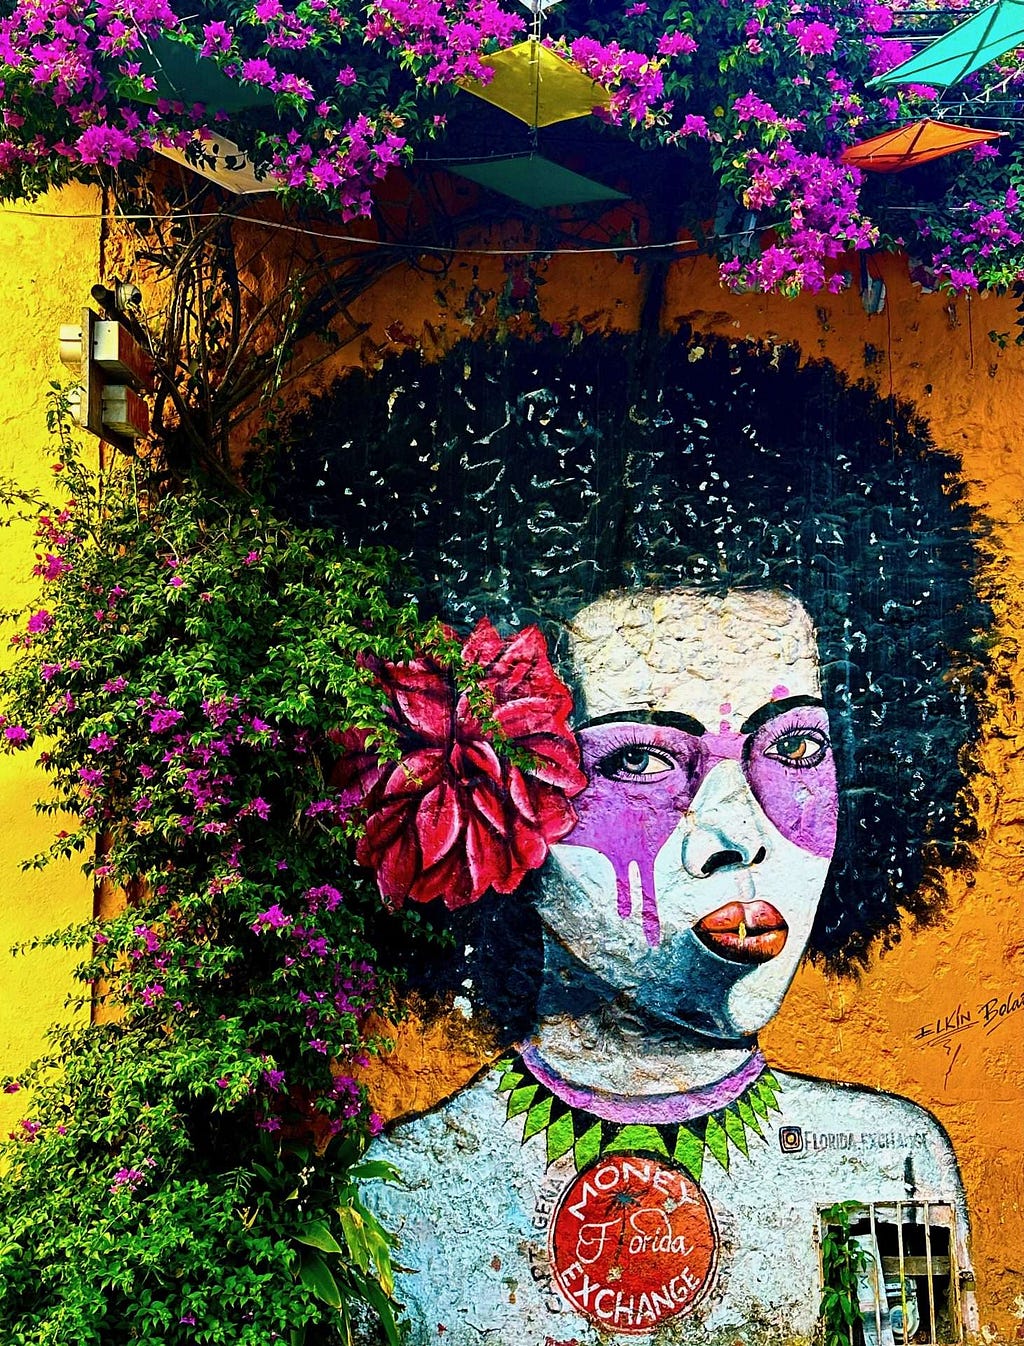 Colorful street mural in Getsamani depicting a woman with a flower in her hair and a purple face, surrounded by blooming bougainvillea on a yellow wall.